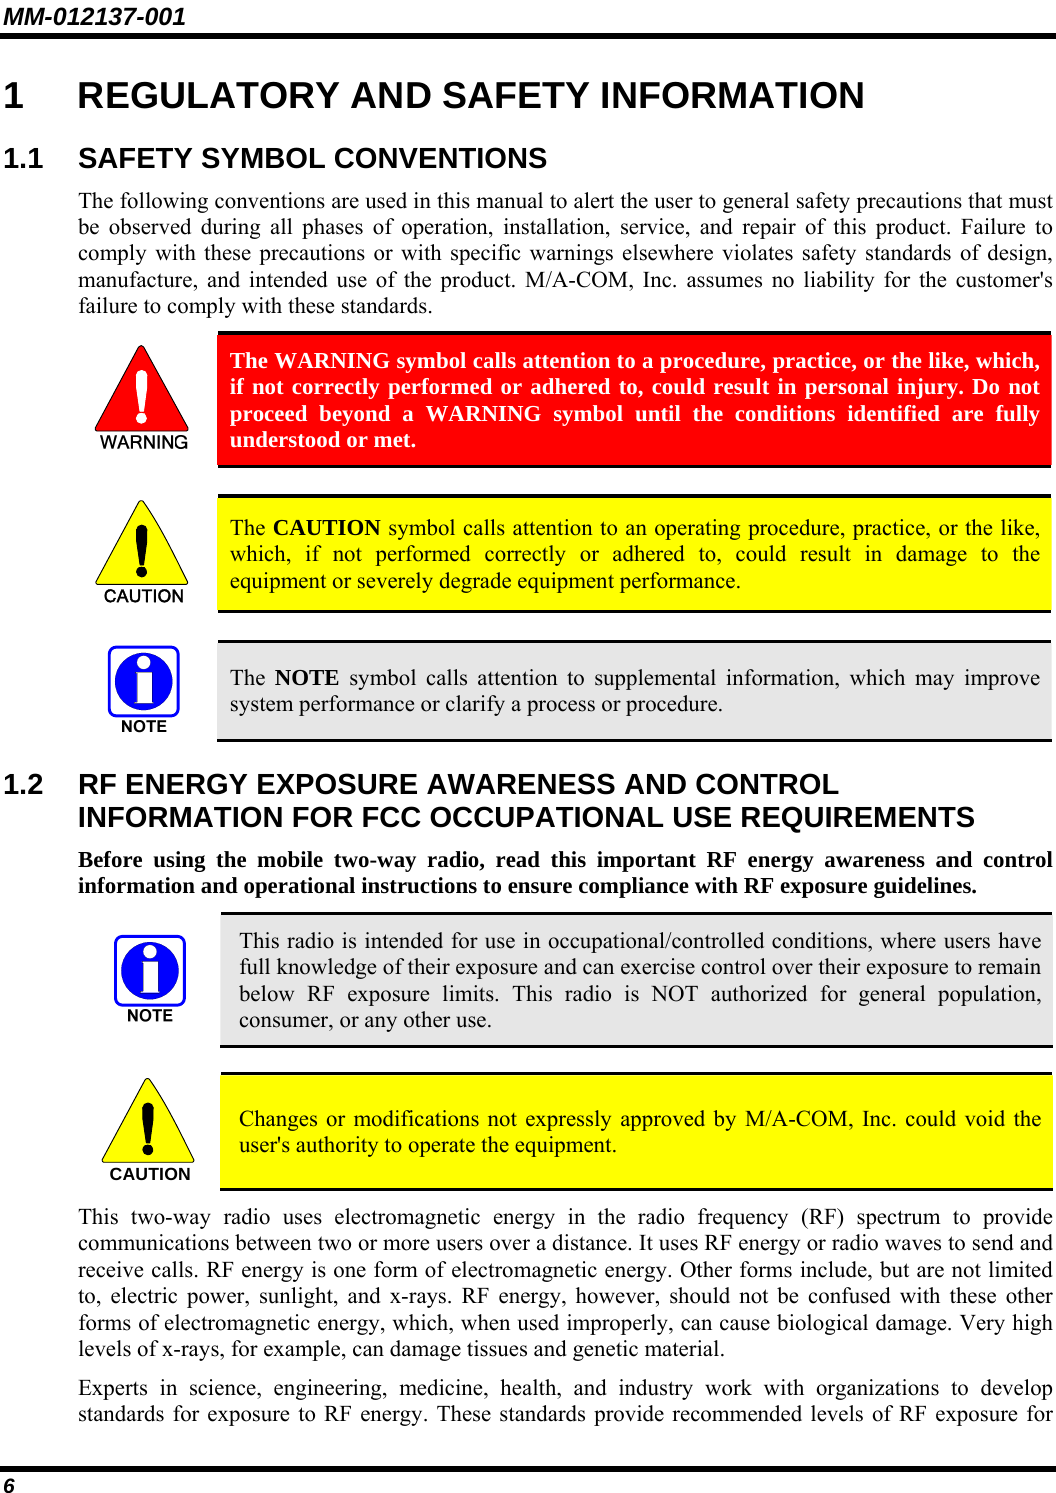 MM-012137-001 6 1  REGULATORY AND SAFETY INFORMATION 1.1 SAFETY SYMBOL CONVENTIONS The following conventions are used in this manual to alert the user to general safety precautions that must be observed during all phases of operation, installation, service, and repair of this product. Failure to comply with these precautions or with specific warnings elsewhere violates safety standards of design, manufacture, and intended use of the product. M/A-COM, Inc. assumes no liability for the customer&apos;s failure to comply with these standards.  The WARNING symbol calls attention to a procedure, practice, or the like, which, if not correctly performed or adhered to, could result in personal injury. Do not proceed beyond a WARNING symbol until the conditions identified are fully understood or met.   CAUTION  The CAUTION symbol calls attention to an operating procedure, practice, or the like, which, if not performed correctly or adhered to, could result in damage to the equipment or severely degrade equipment performance.    The  NOTE symbol calls attention to supplemental information, which may improve system performance or clarify a process or procedure. 1.2  RF ENERGY EXPOSURE AWARENESS AND CONTROL INFORMATION FOR FCC OCCUPATIONAL USE REQUIREMENTS Before using the mobile two-way radio, read this important RF energy awareness and control information and operational instructions to ensure compliance with RF exposure guidelines.  This radio is intended for use in occupational/controlled conditions, where users have full knowledge of their exposure and can exercise control over their exposure to remain below RF exposure limits. This radio is NOT authorized for general population, consumer, or any other use.  CAUTION  Changes or modifications not expressly approved by M/A-COM, Inc. could void the user&apos;s authority to operate the equipment. This two-way radio uses electromagnetic energy in the radio frequency (RF) spectrum to provide communications between two or more users over a distance. It uses RF energy or radio waves to send and receive calls. RF energy is one form of electromagnetic energy. Other forms include, but are not limited to, electric power, sunlight, and x-rays. RF energy, however, should not be confused with these other forms of electromagnetic energy, which, when used improperly, can cause biological damage. Very high levels of x-rays, for example, can damage tissues and genetic material. Experts in science, engineering, medicine, health, and industry work with organizations to develop standards for exposure to RF energy. These standards provide recommended levels of RF exposure for 